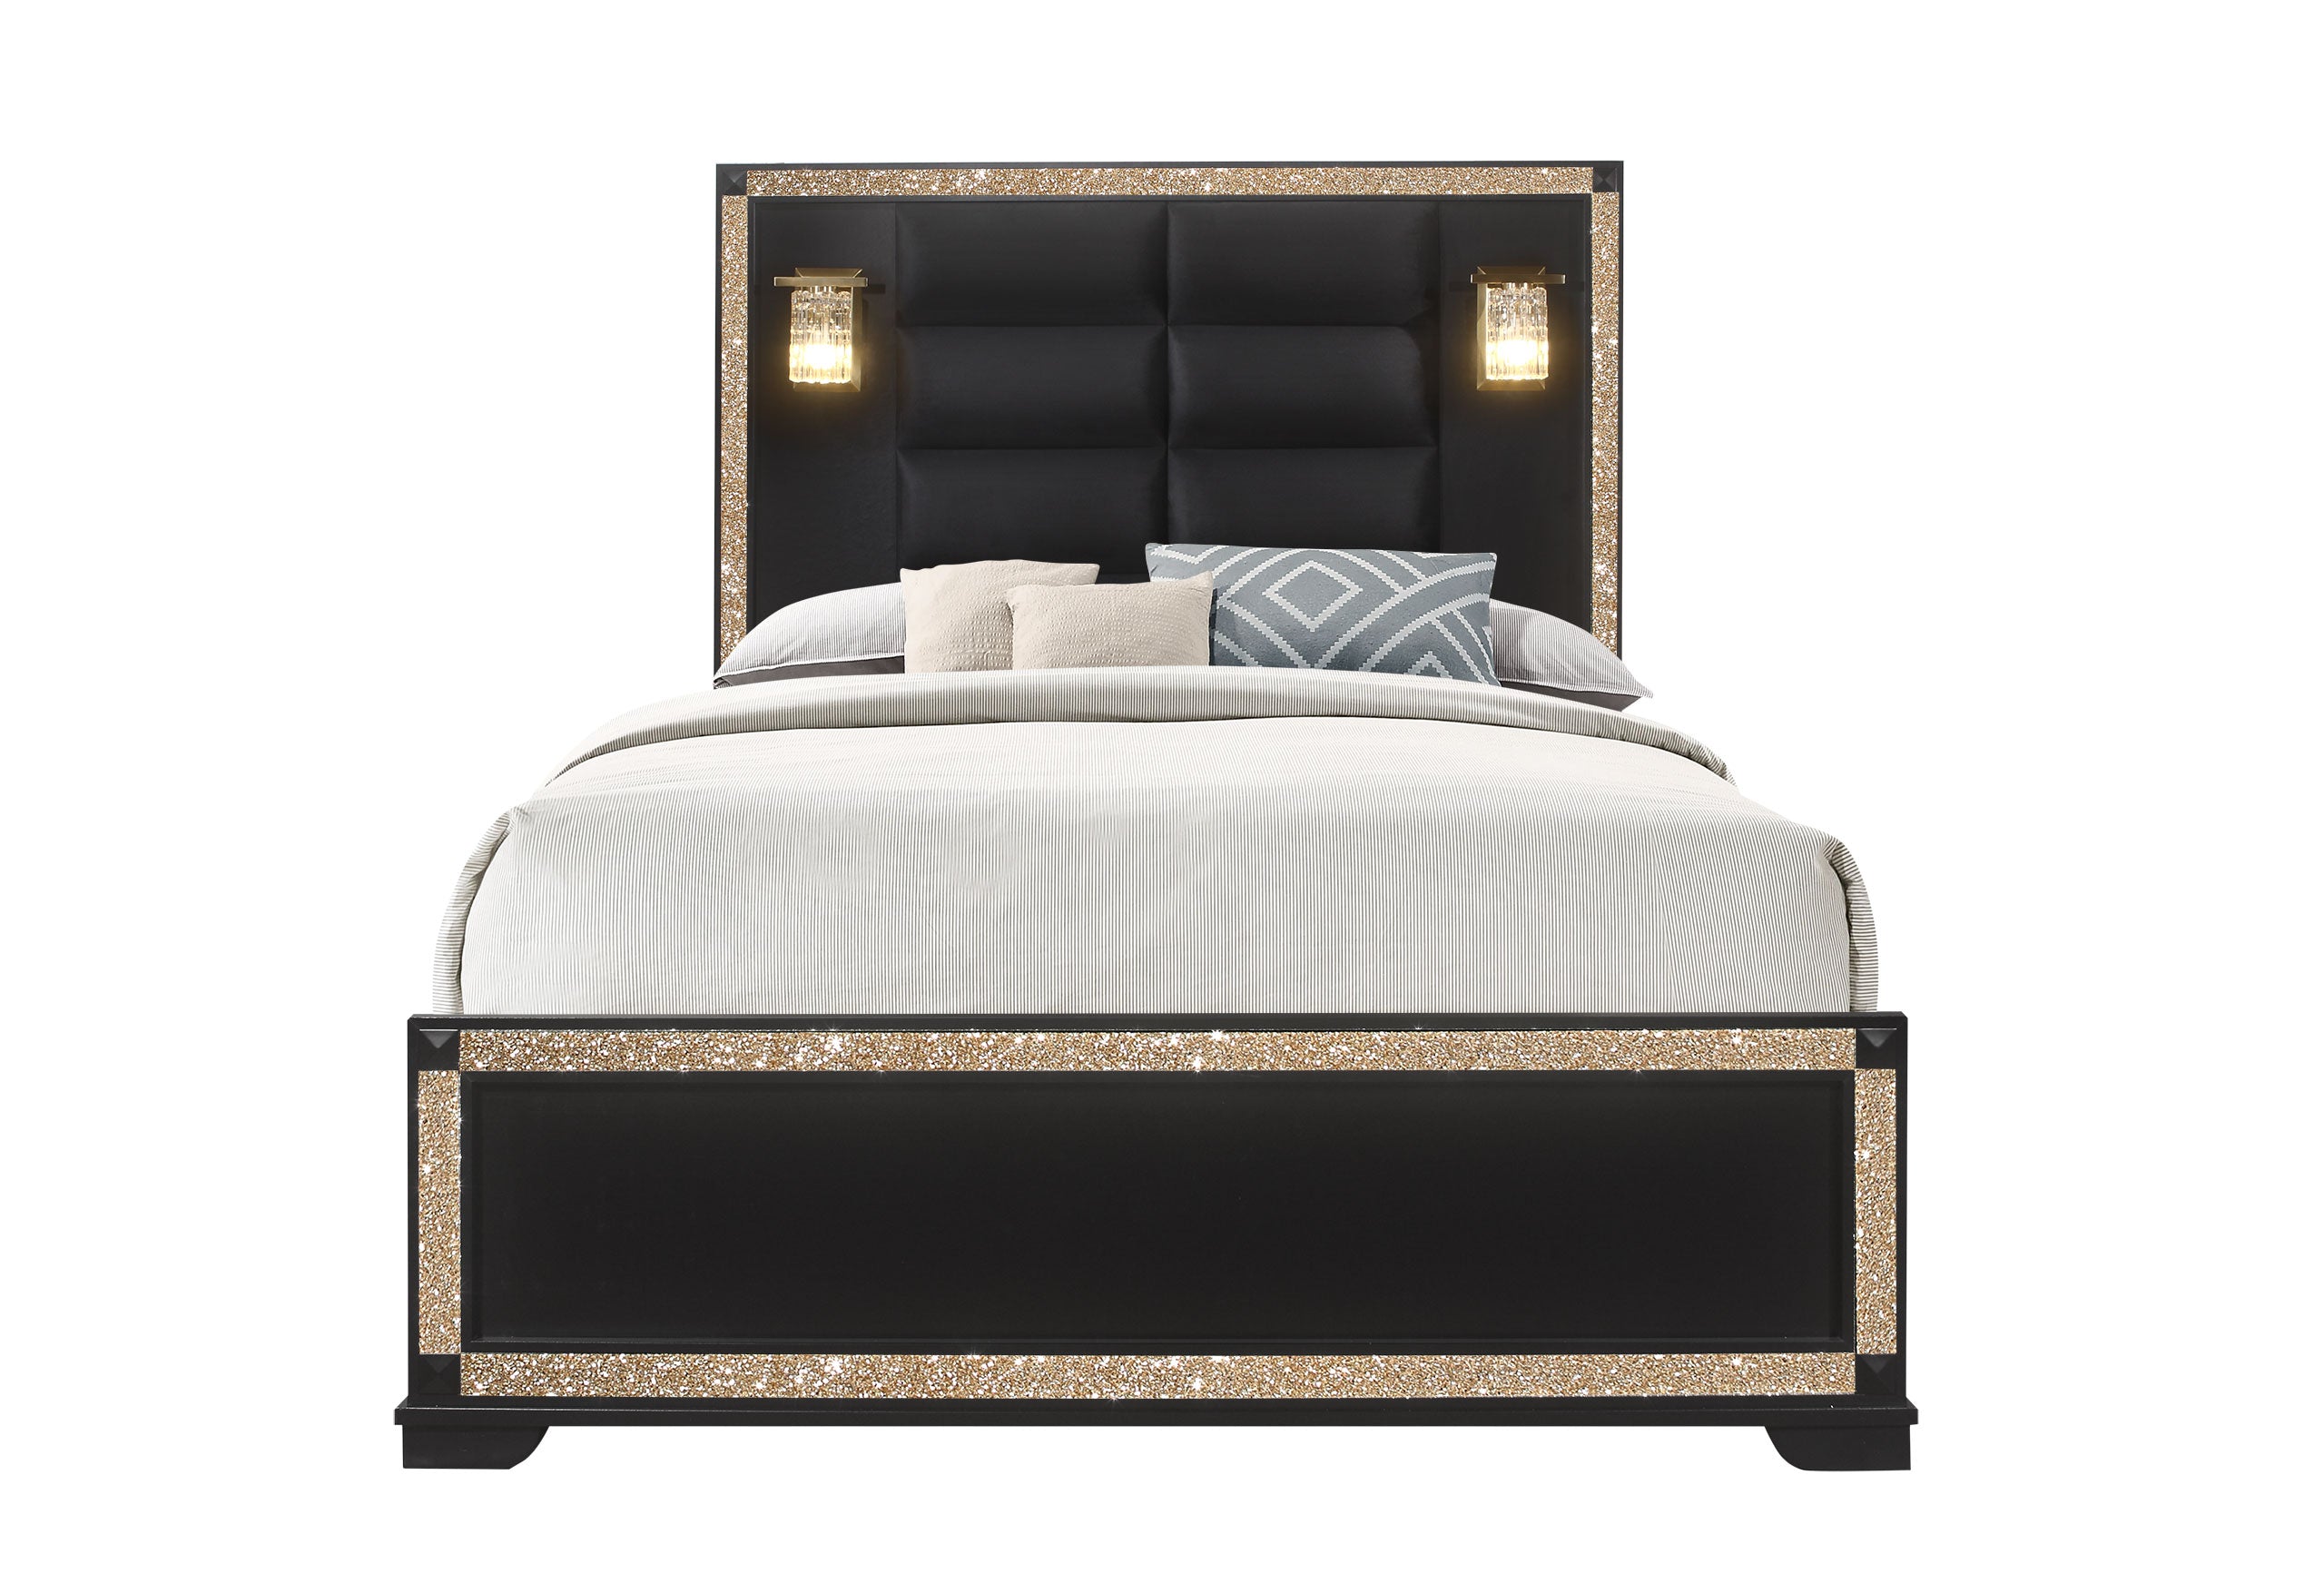 BLAKE - FULL BED WITH LAMPS, KING BED WITH LAMPS, QUEEN BED WITH LAMPS